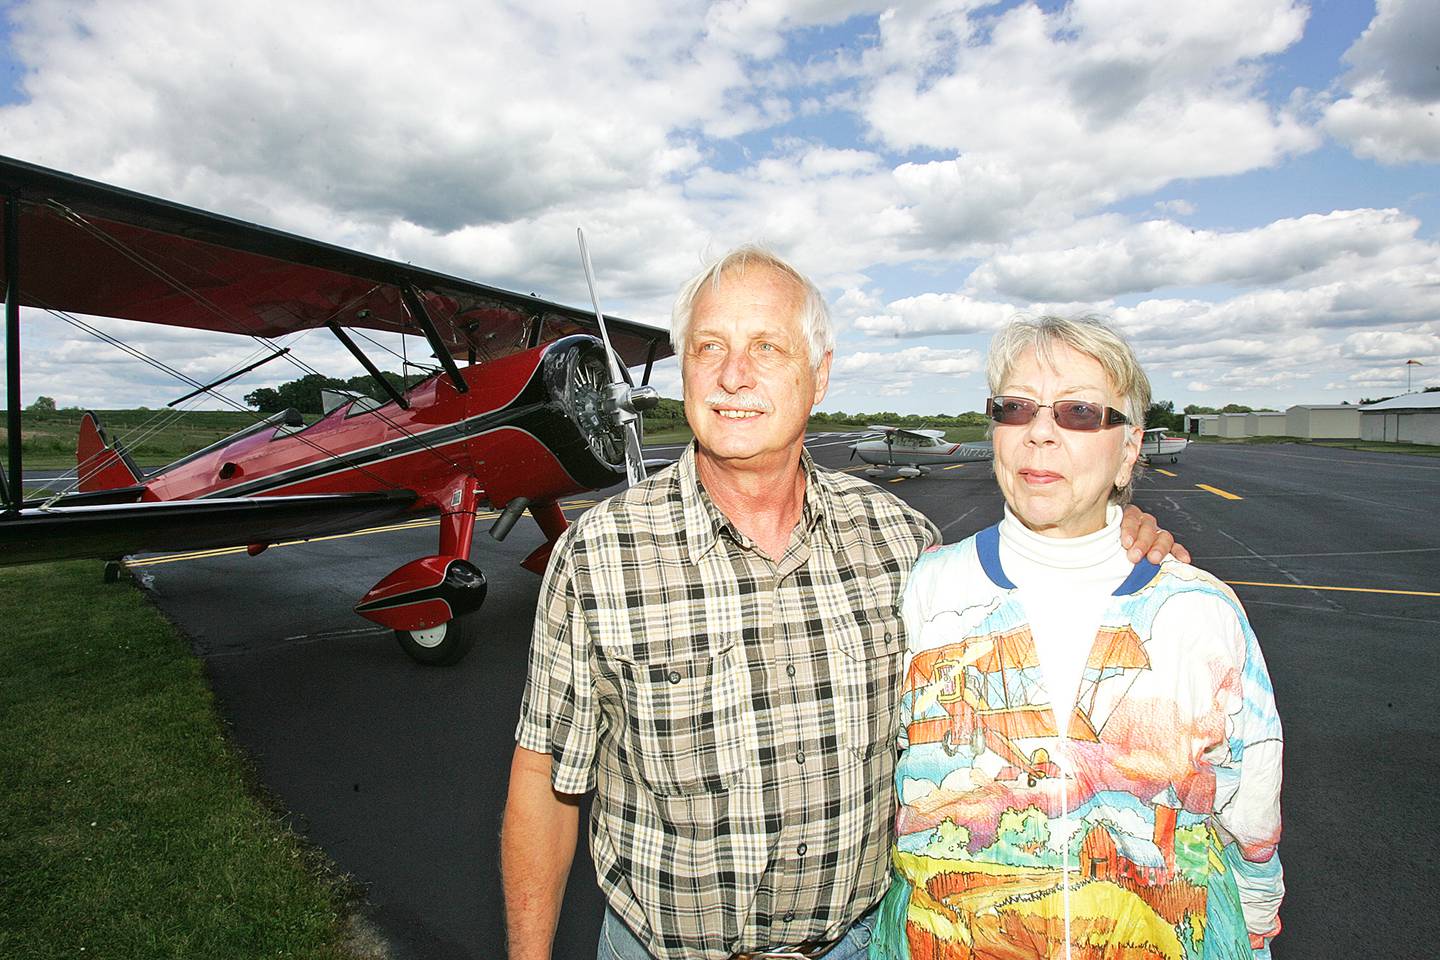 Claude and Diane Sonday of Bull Valley bought Galt Airport in June at a foreclosure auction and have been making improvements including sealing and marking the 2800-foot runway, taxiway and  hanger aprons.